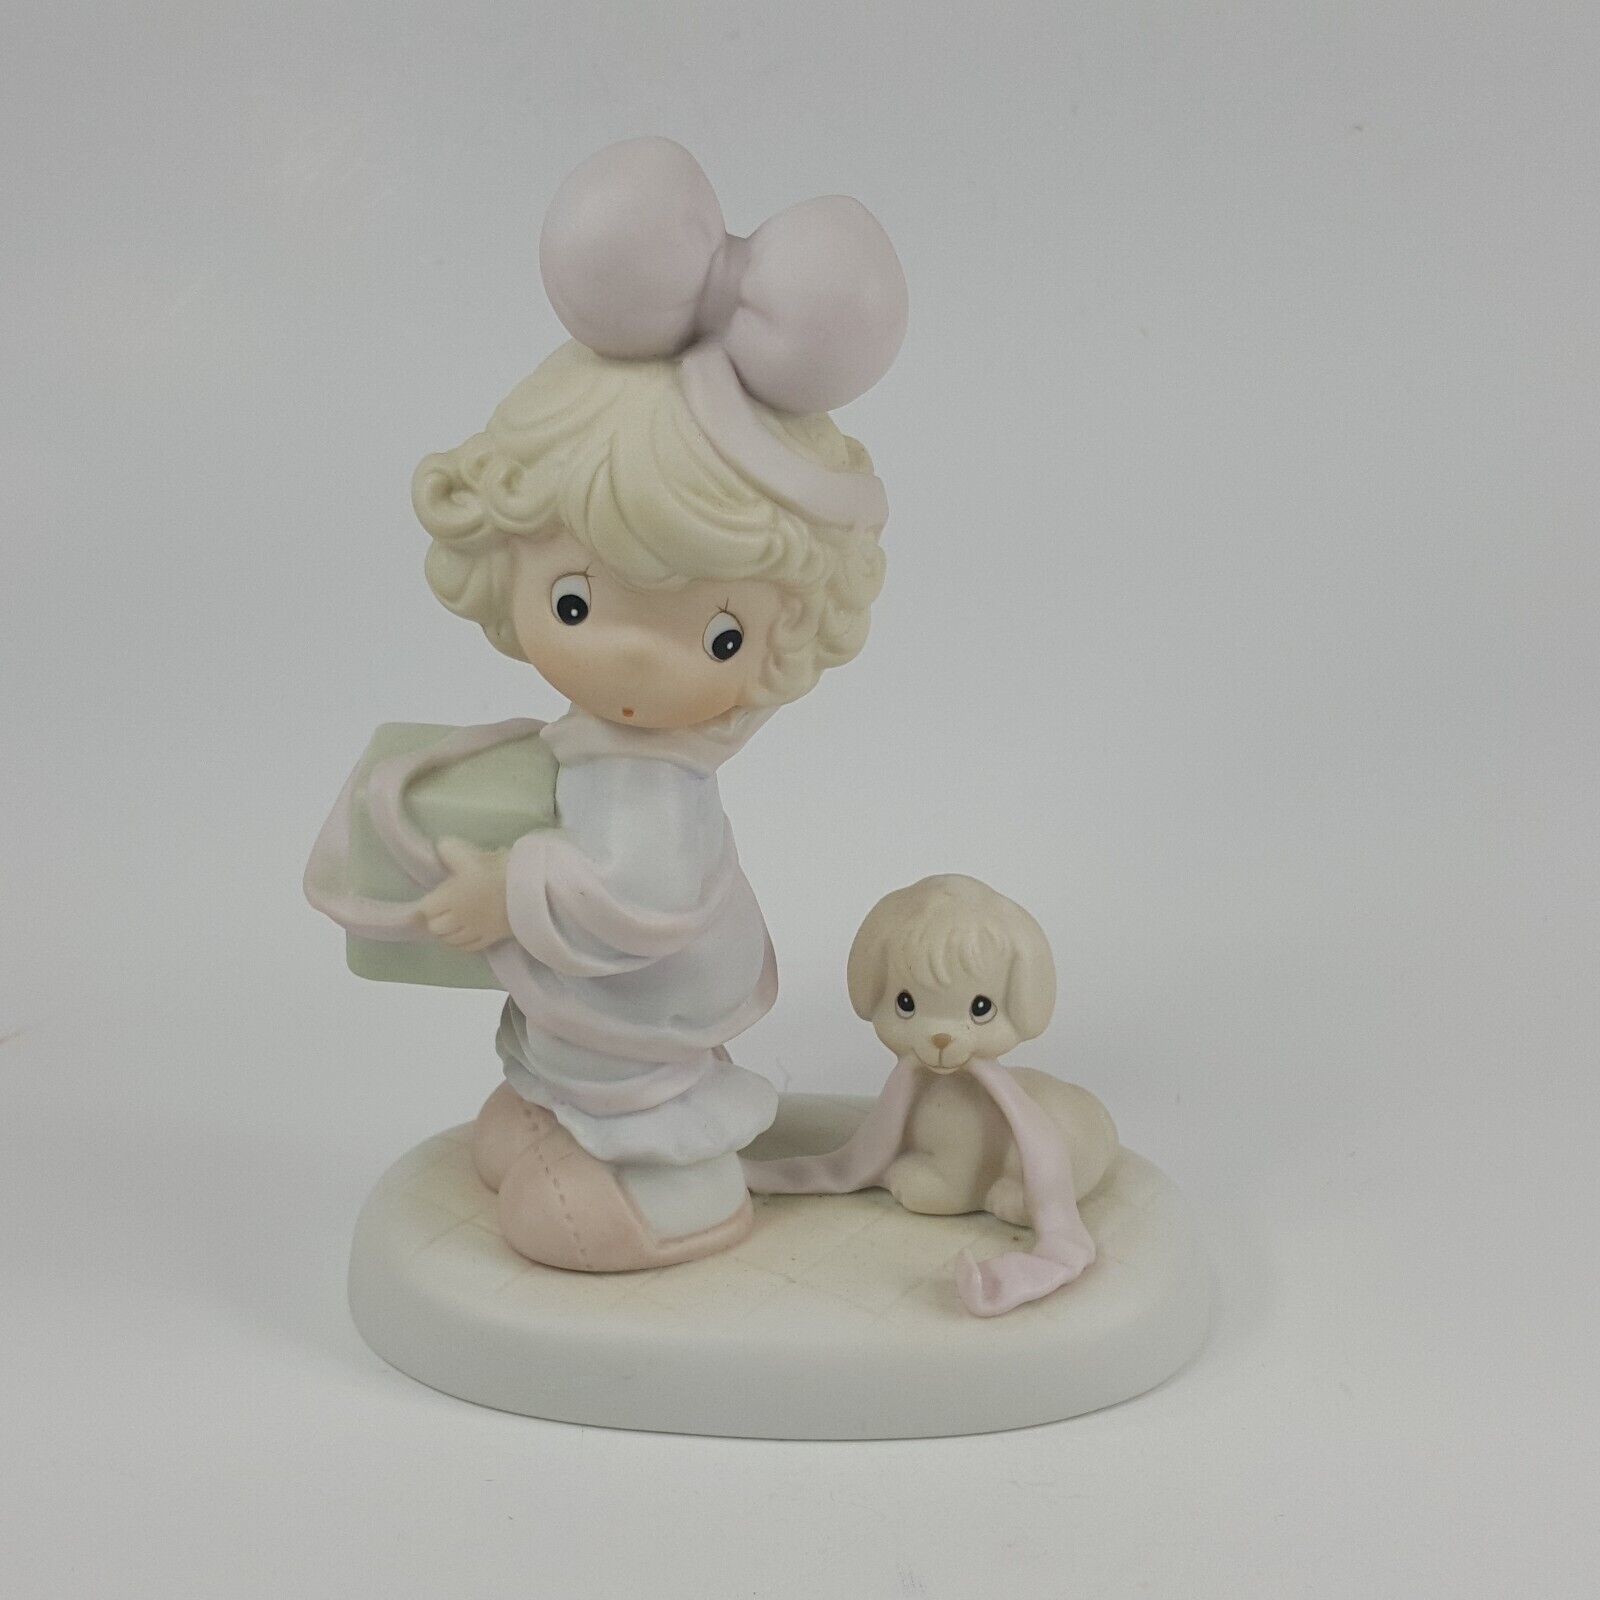 Primary image for Precious Moments 'Tied Up For The Holidays' Figurine 527580 1983 Enesco HDH5#